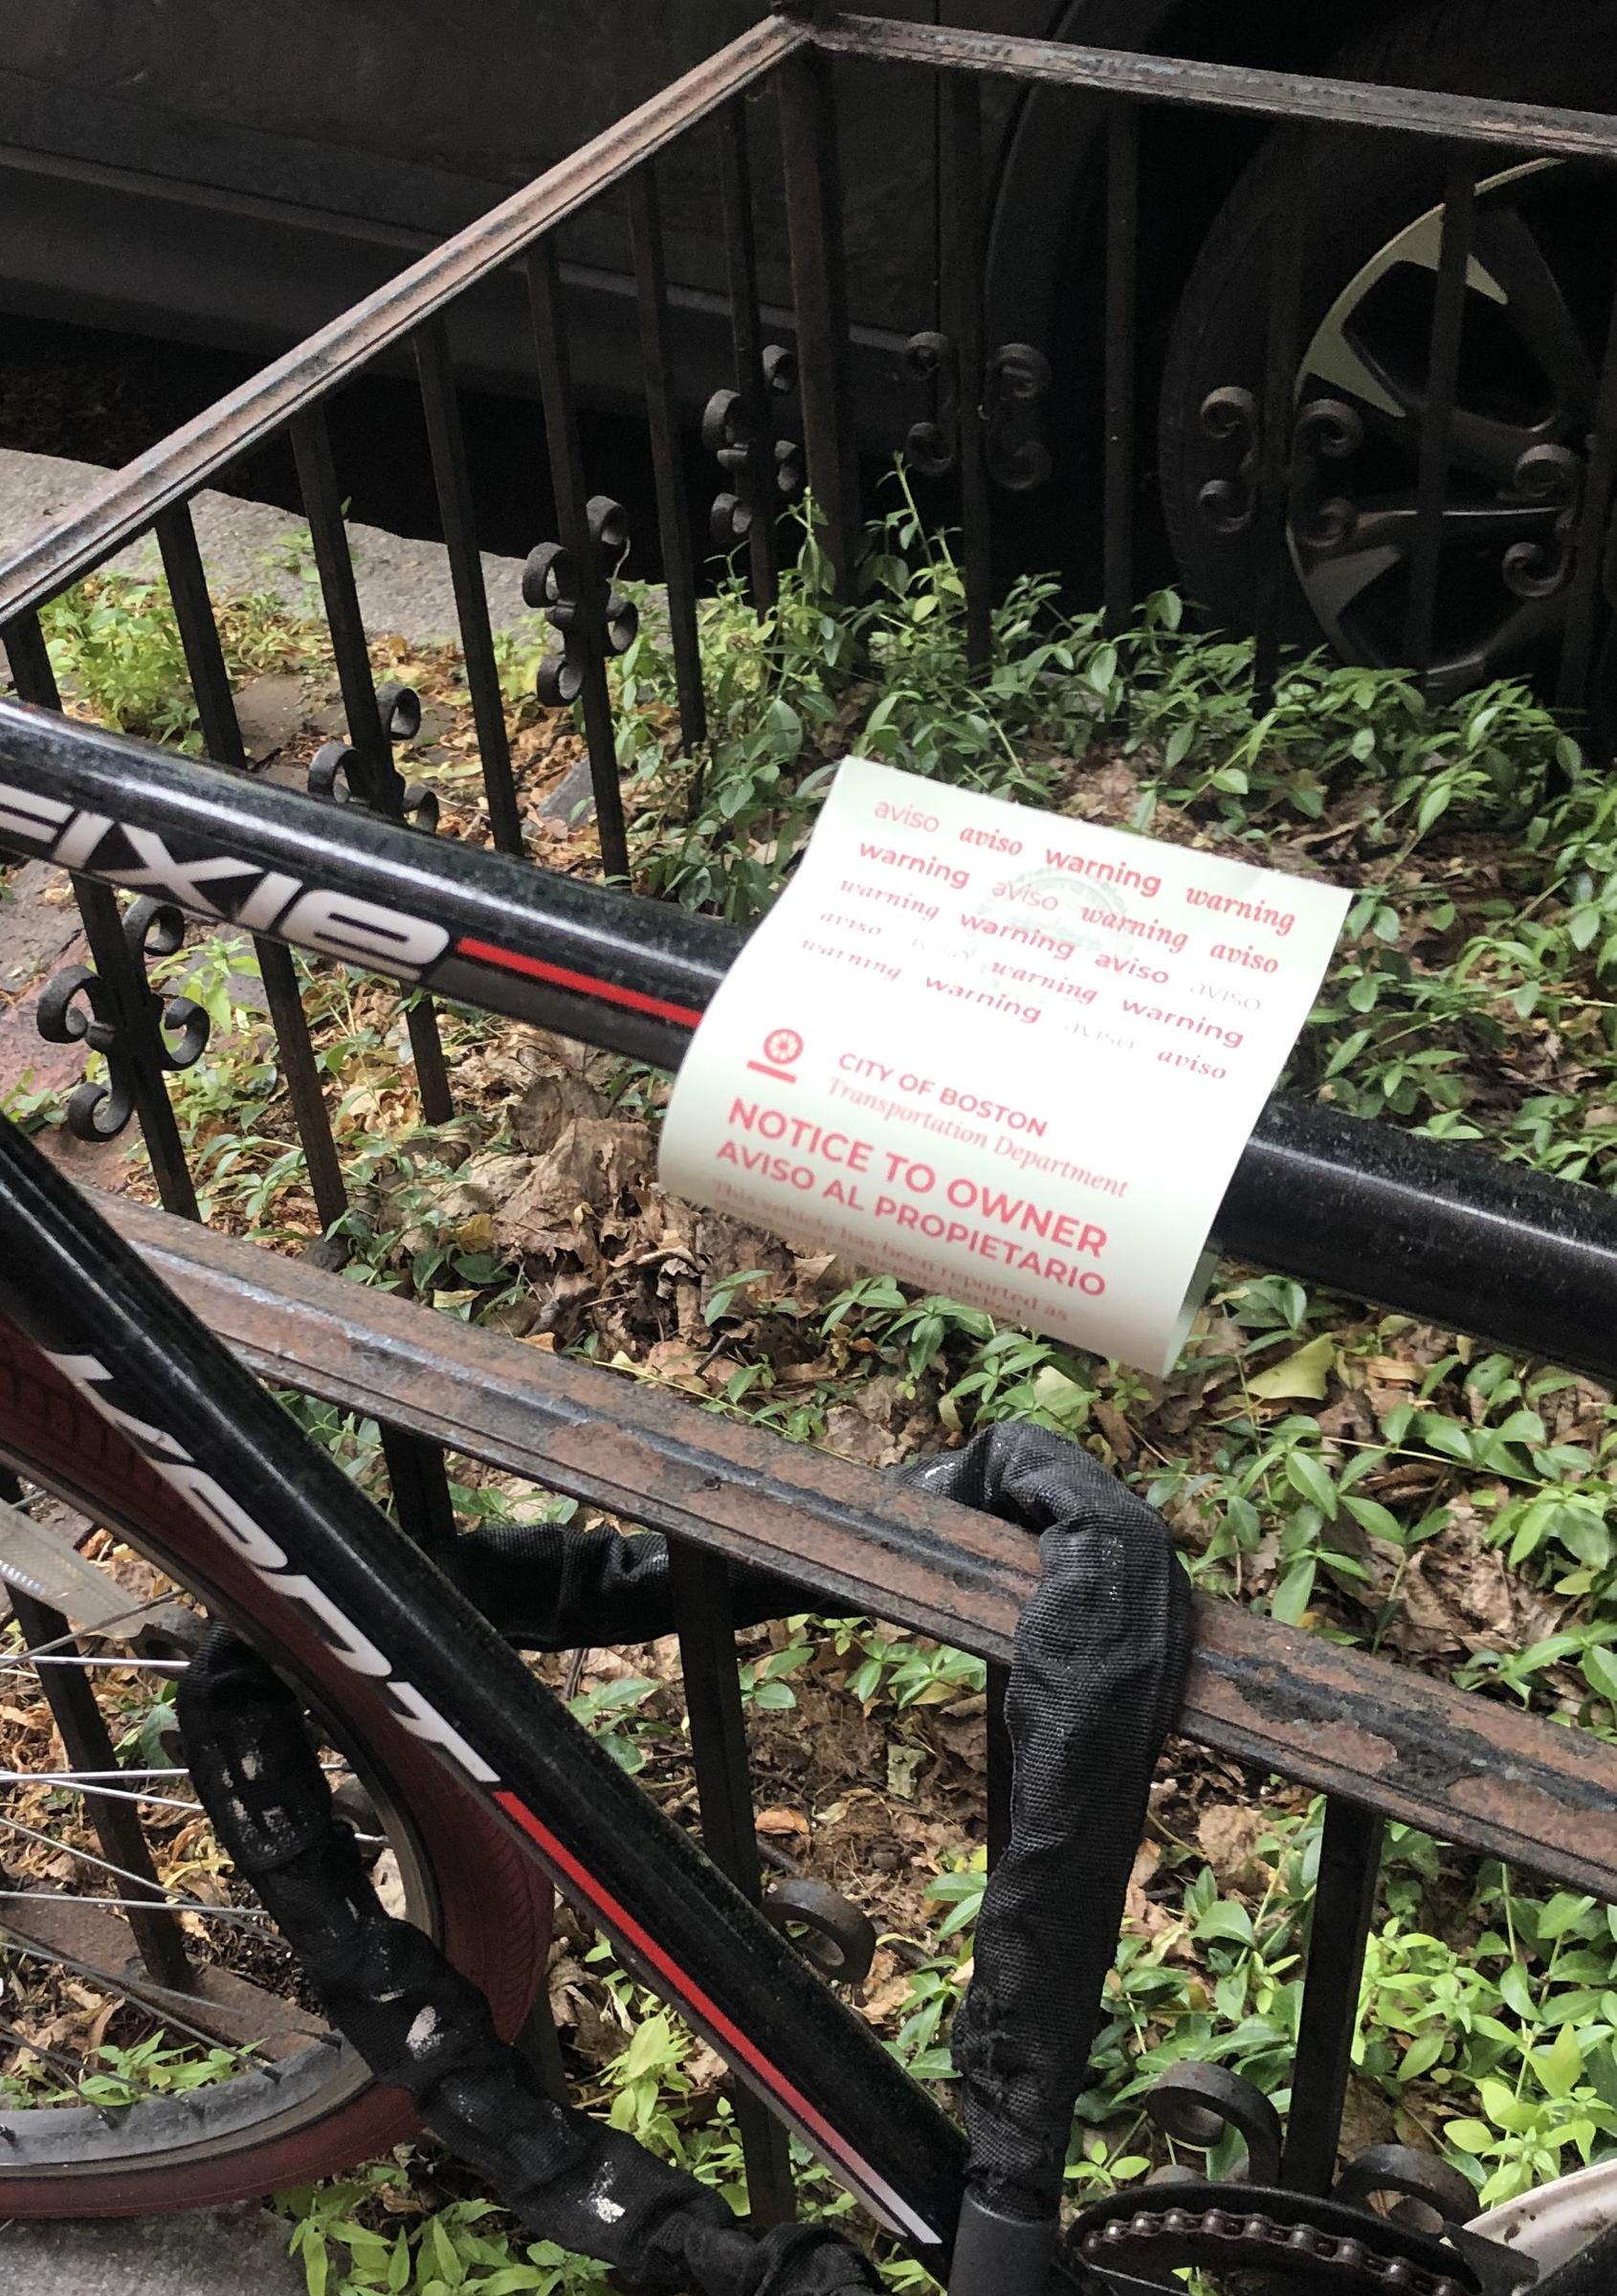 Close-up view of a paper tag attached to a black bicycle. The tag says "NOTICE TO OWNER" and features the City of Boston Transportation Department logo.